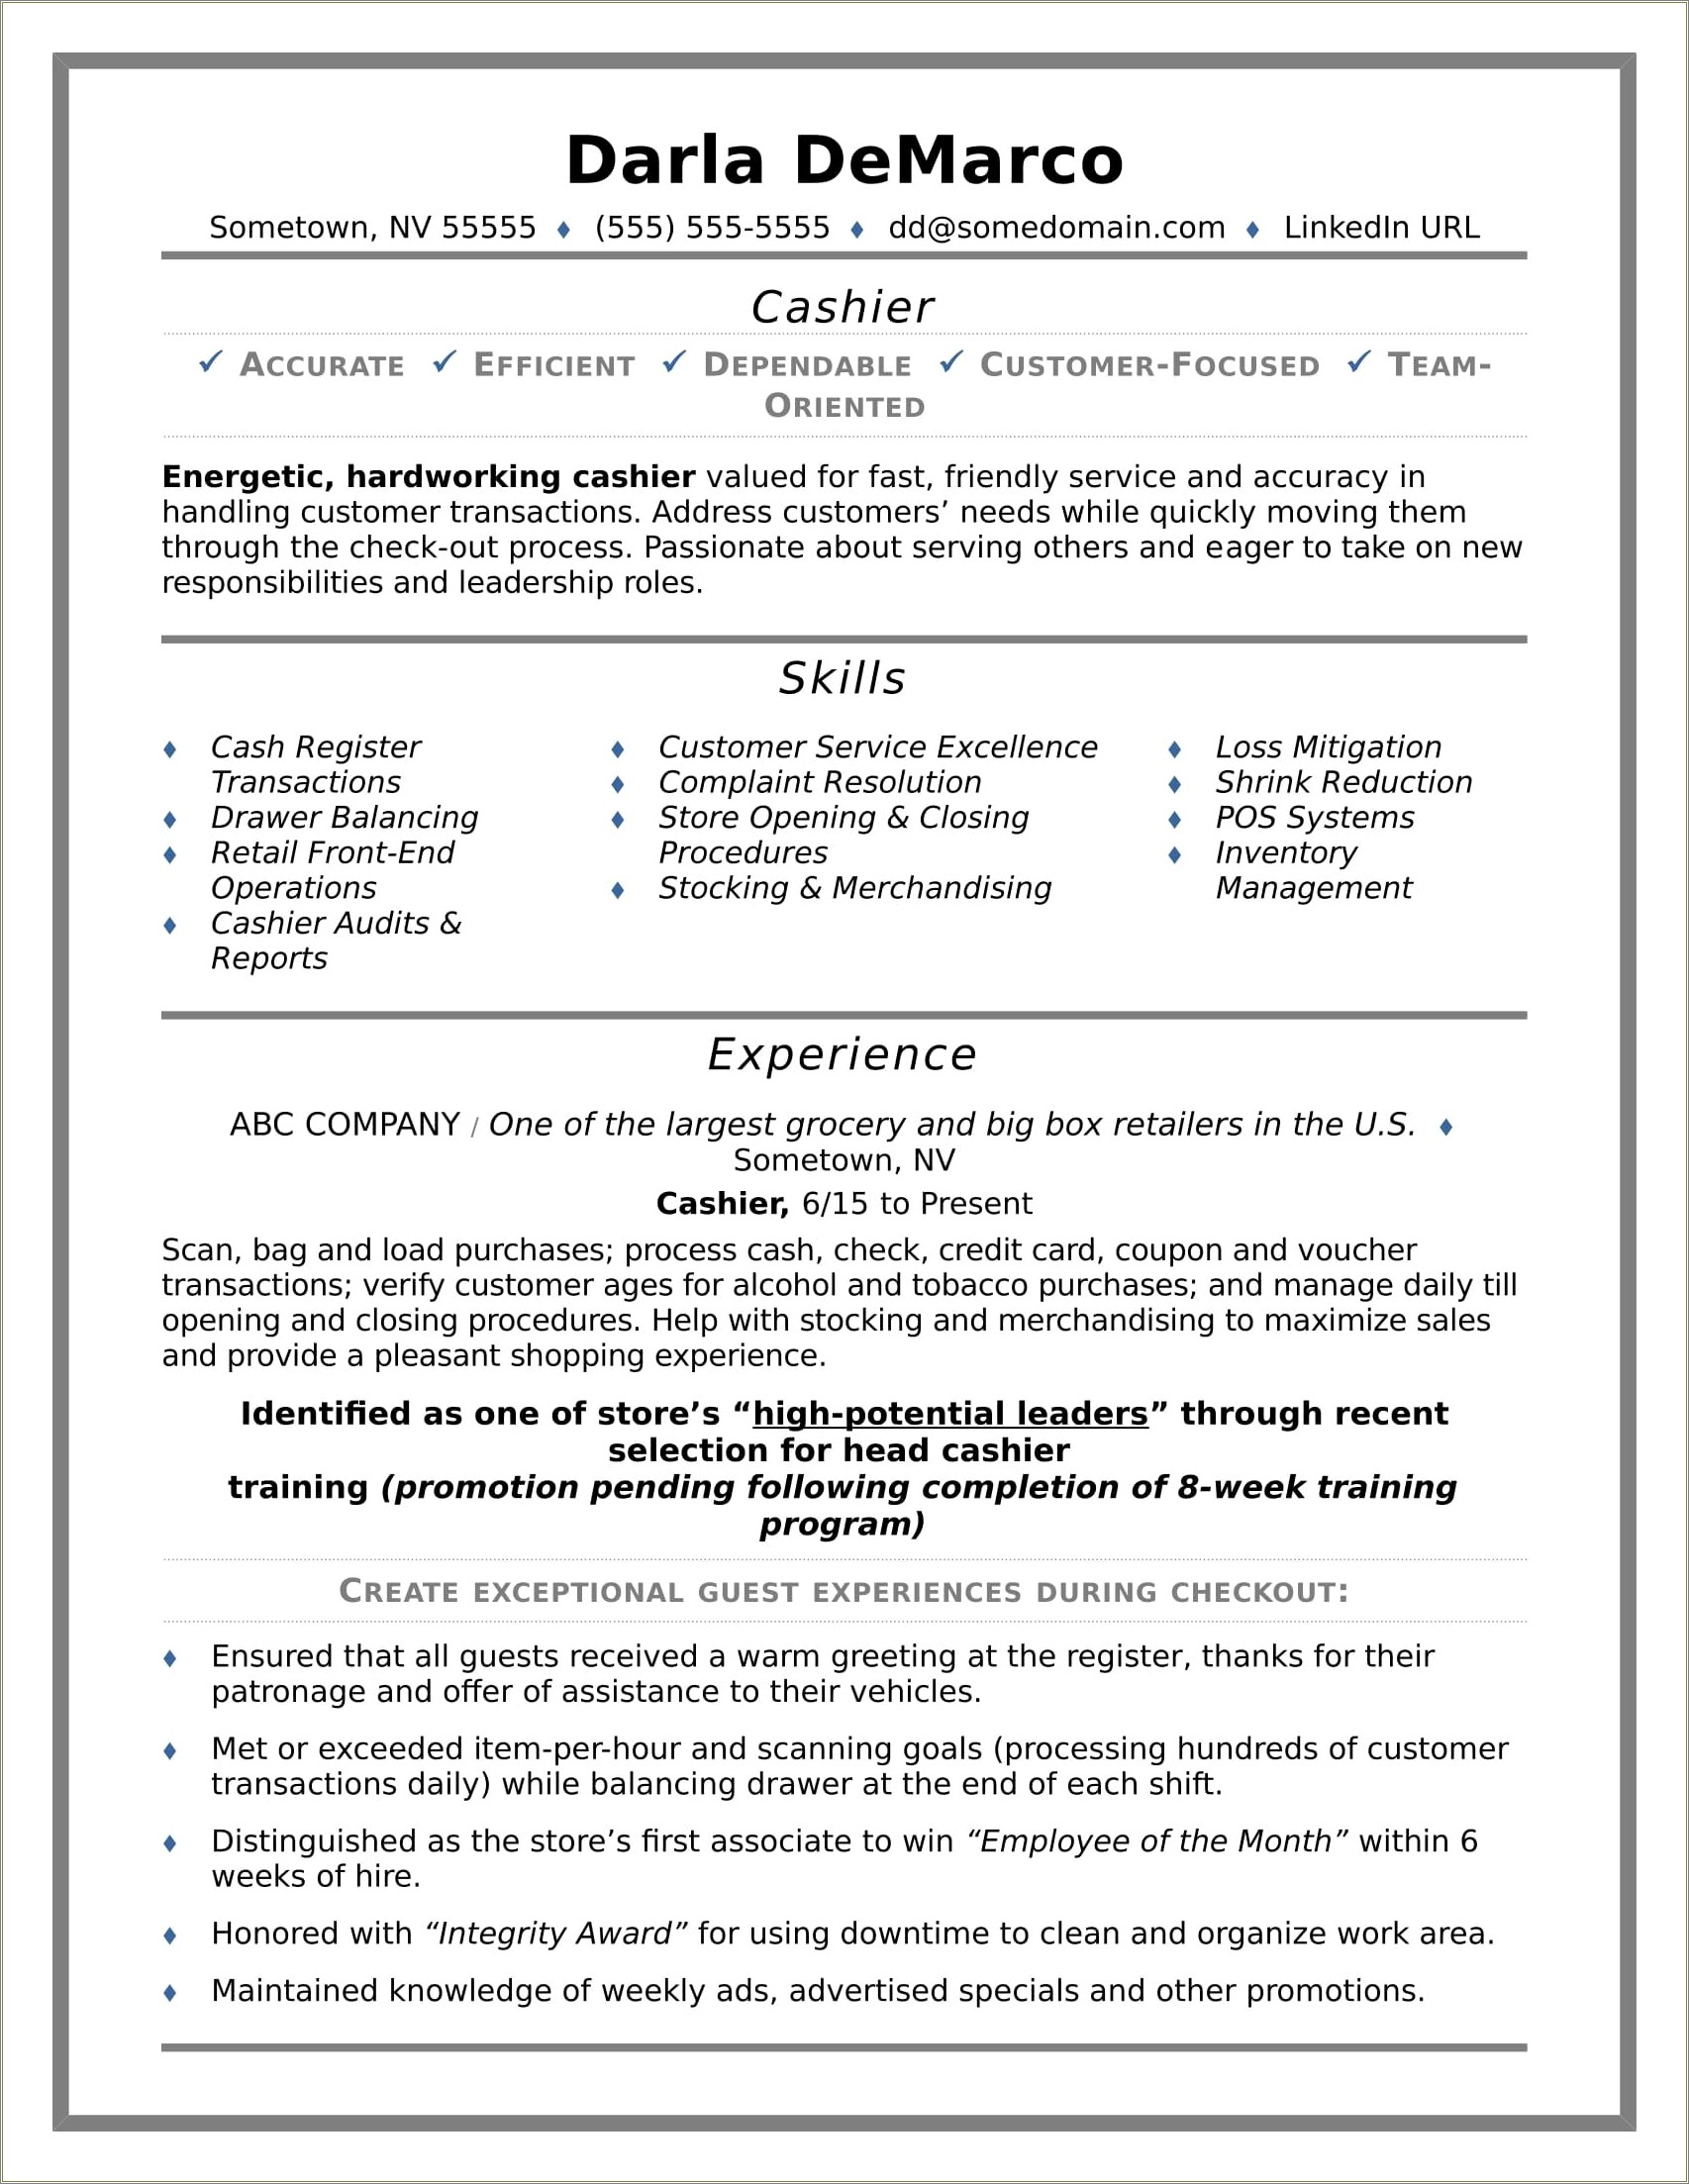 Resume Outline With No Work Experience